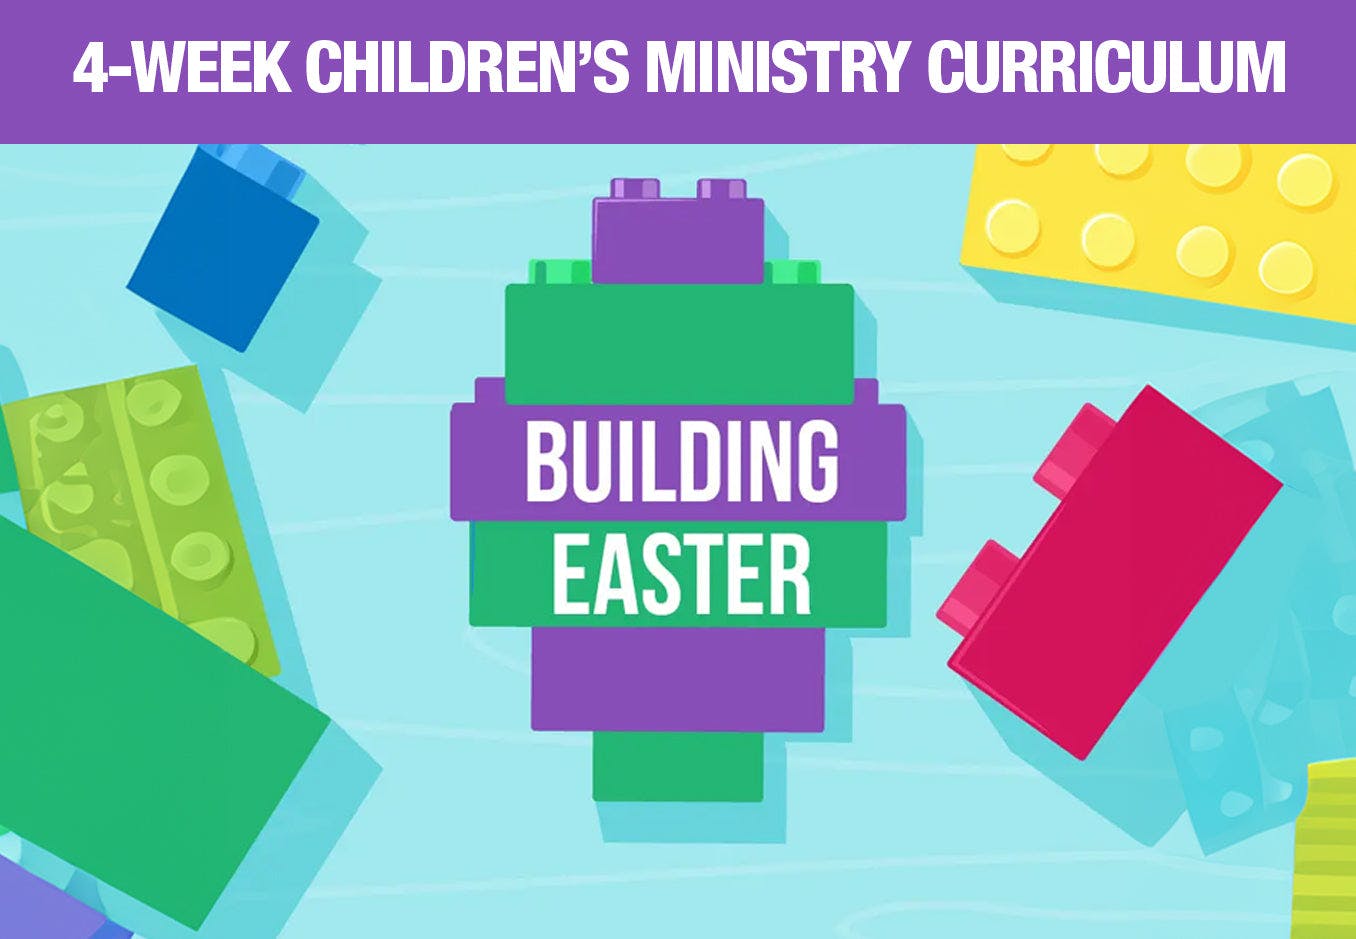 Building Easter: 4-Week Children's Ministry Curriculum